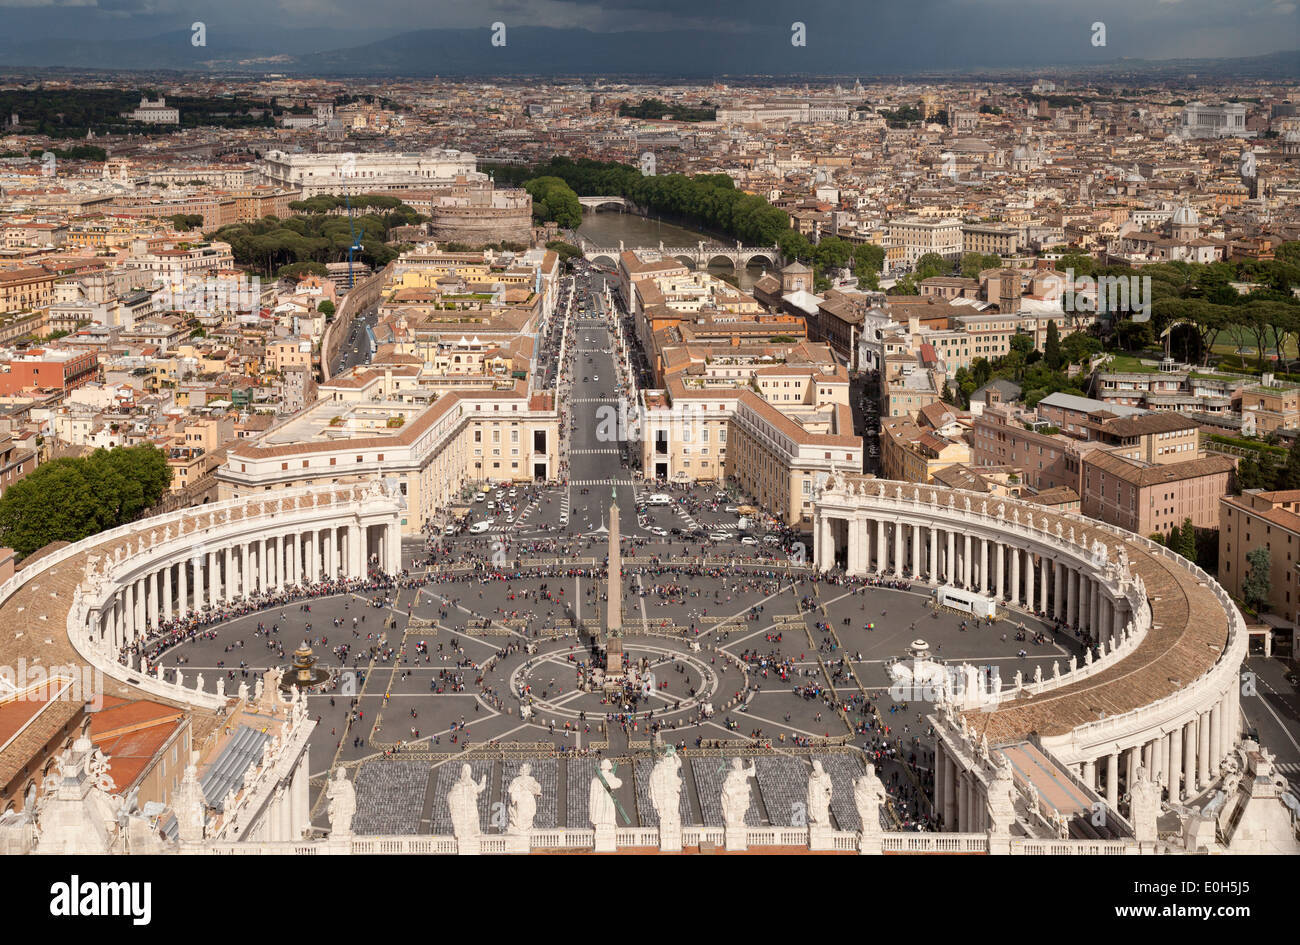 St Peters Square ( Piazza ) , Vatican City, Rome, view taken from top of St Peters Basilica, Rome Italy Europe Stock Photo